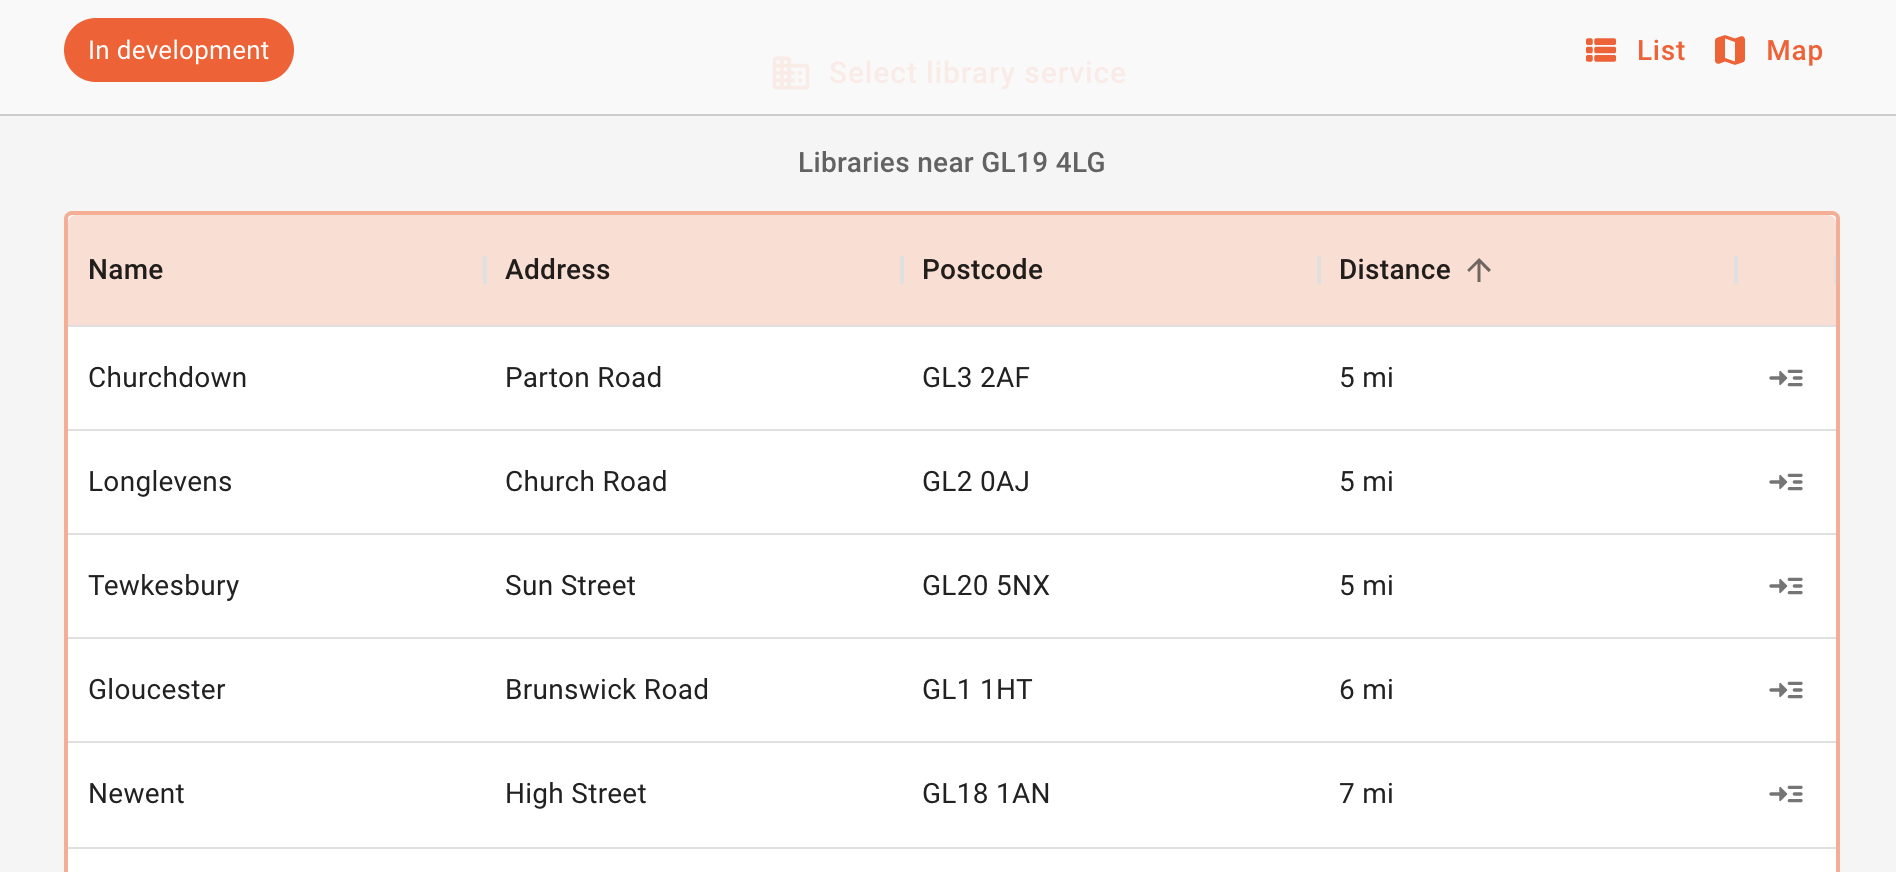 A screenshot of the library listings page on LibraryMap showing results for a location in rural Gloucestershire. The listed libraries are Churchdown, Longlevels, Newent, Tewkesbury, and Gloucester